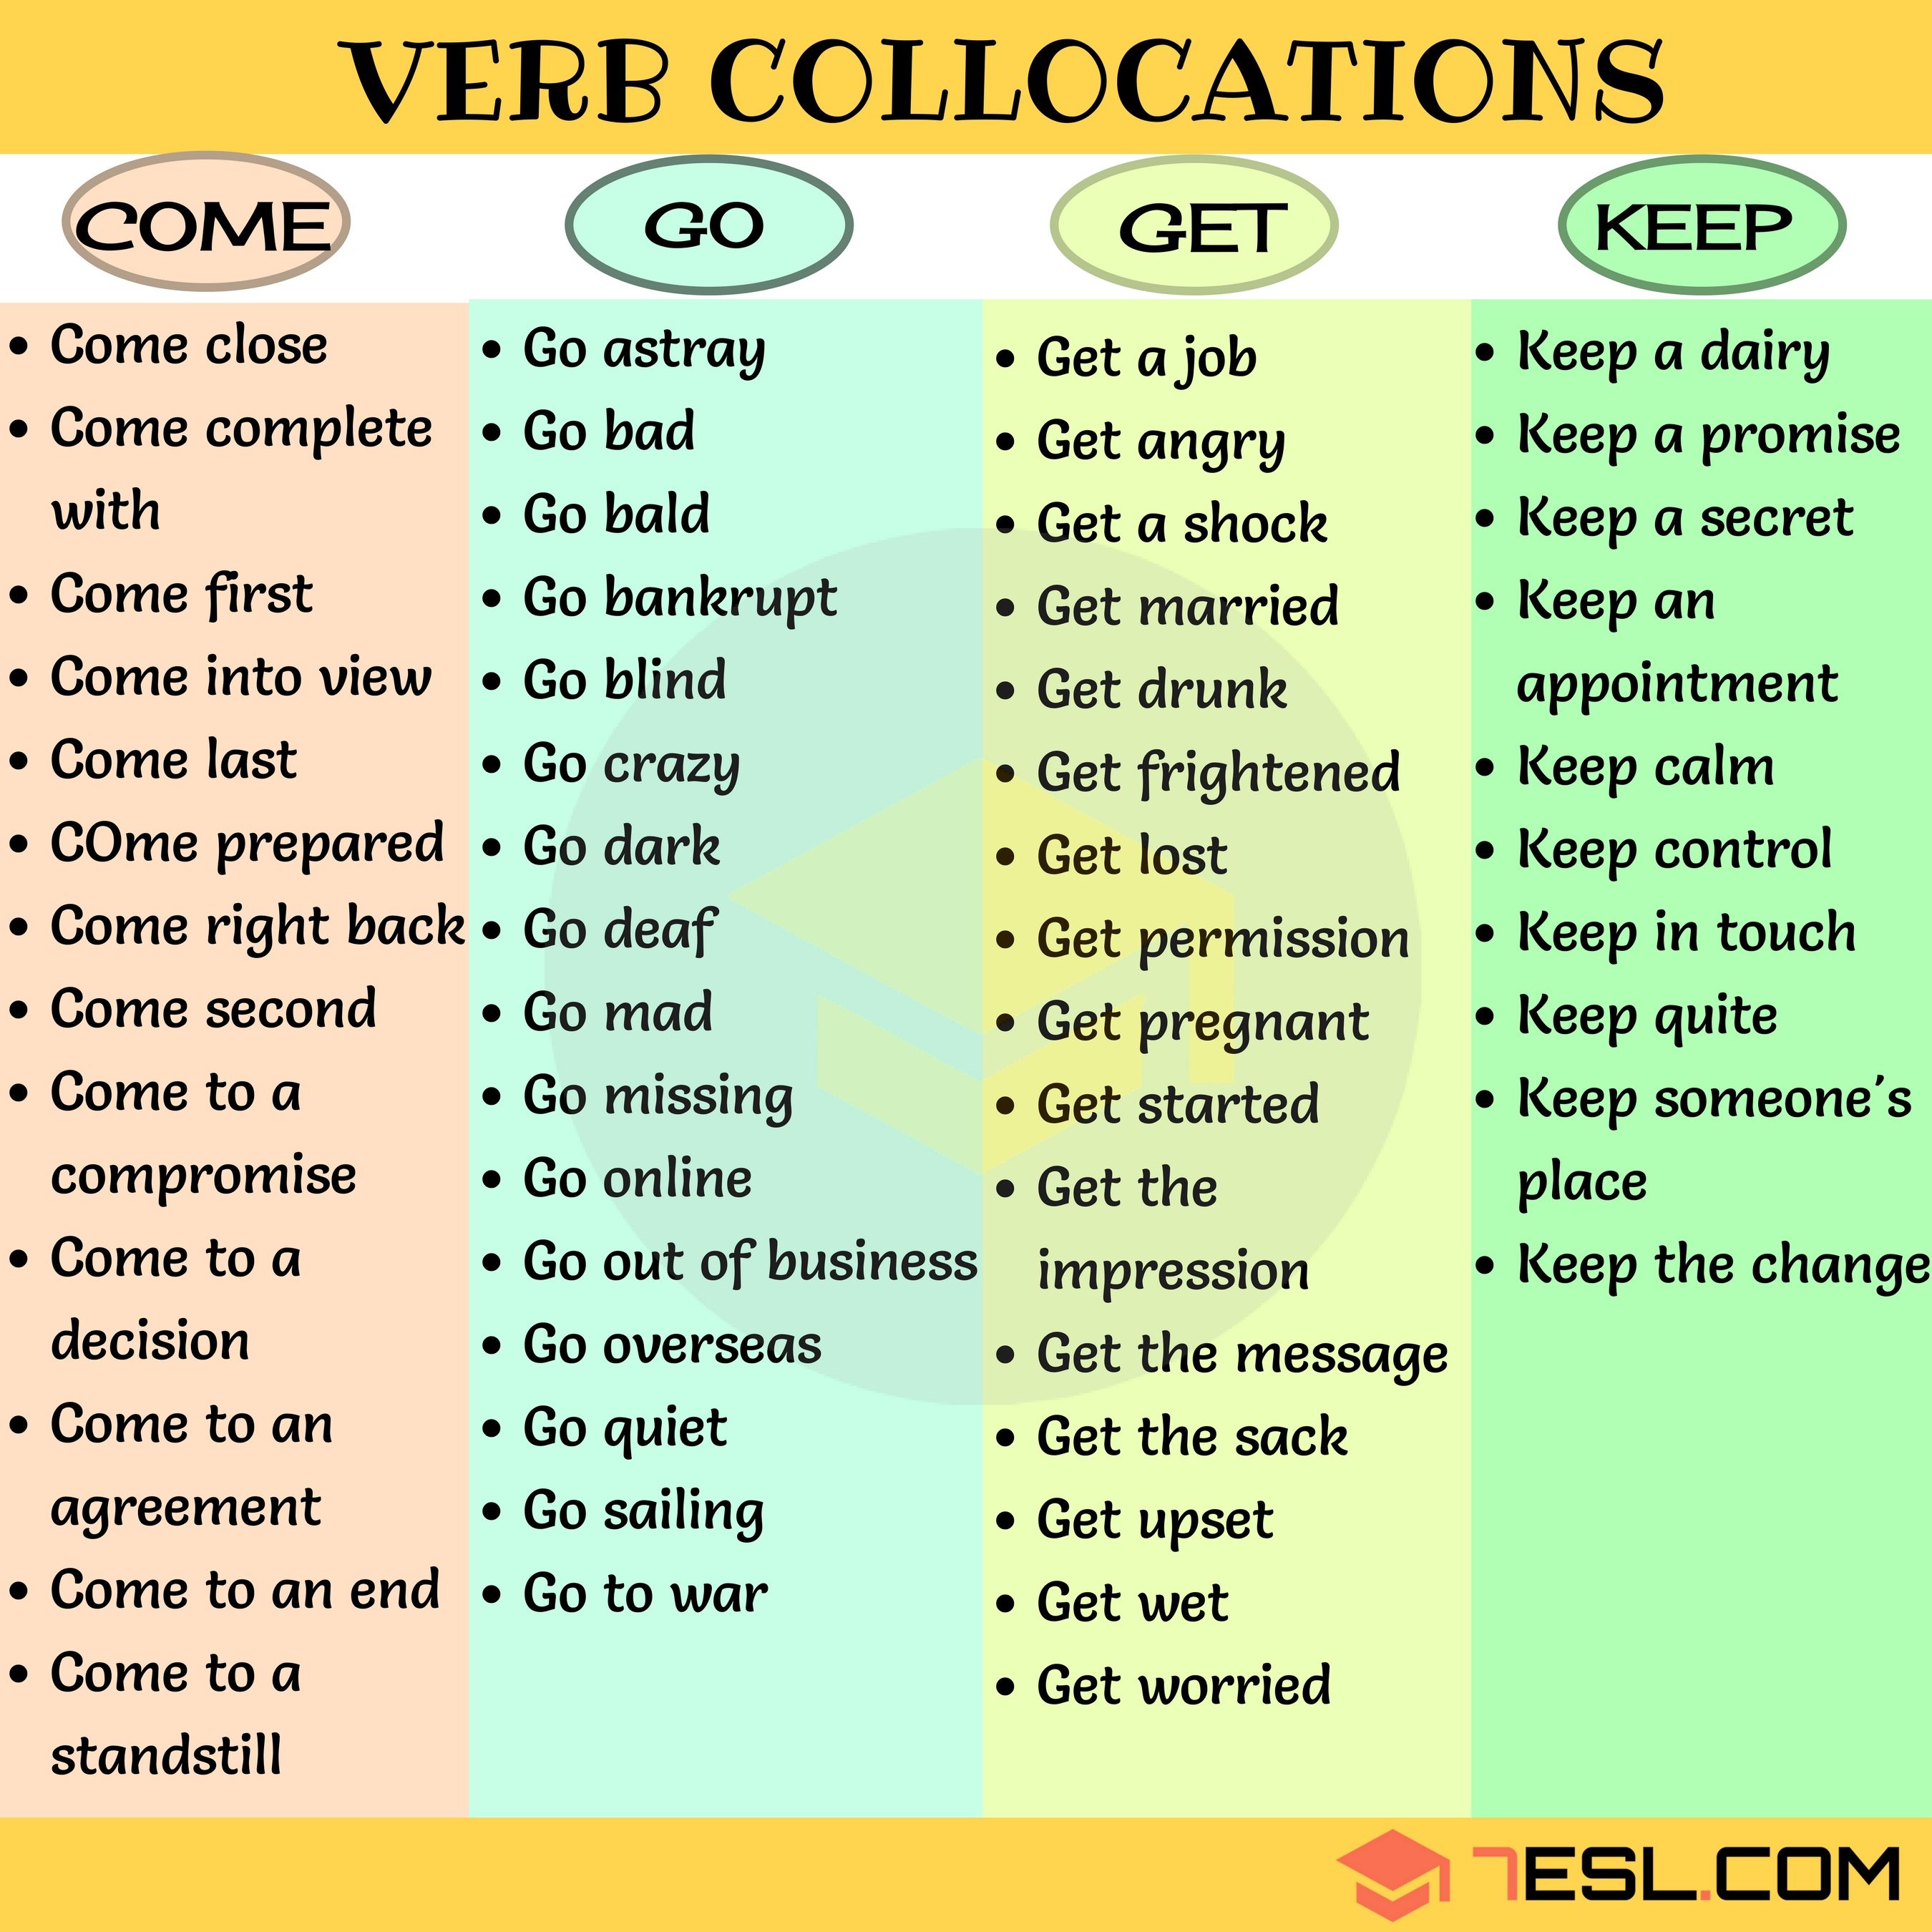 example of adverb adjective collocation